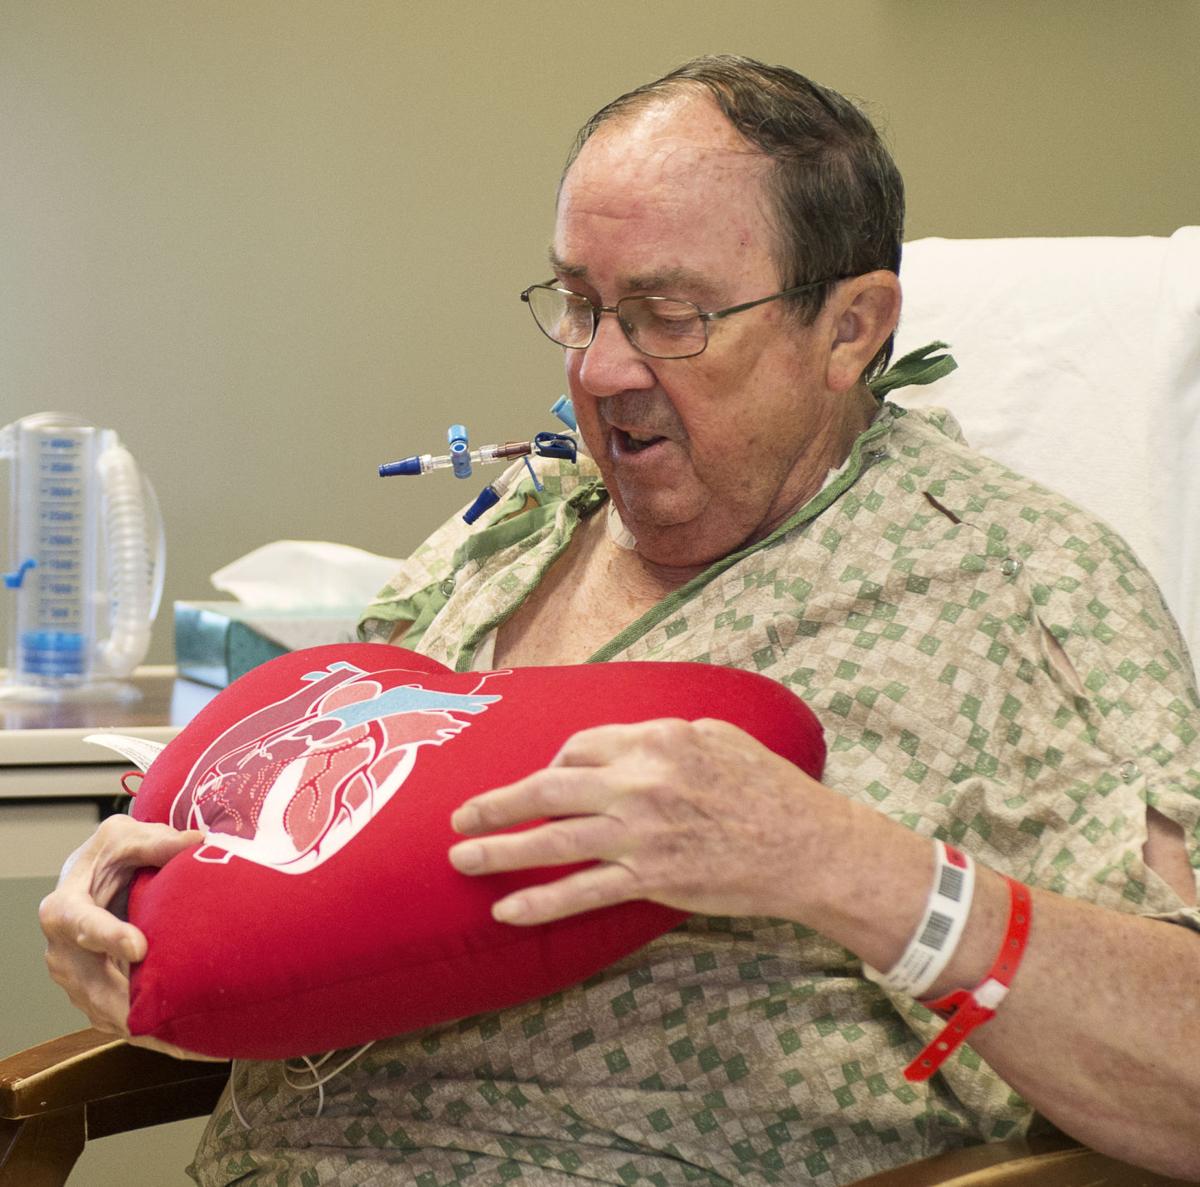 Lincoln doctors replace heart valve without general anesthesia